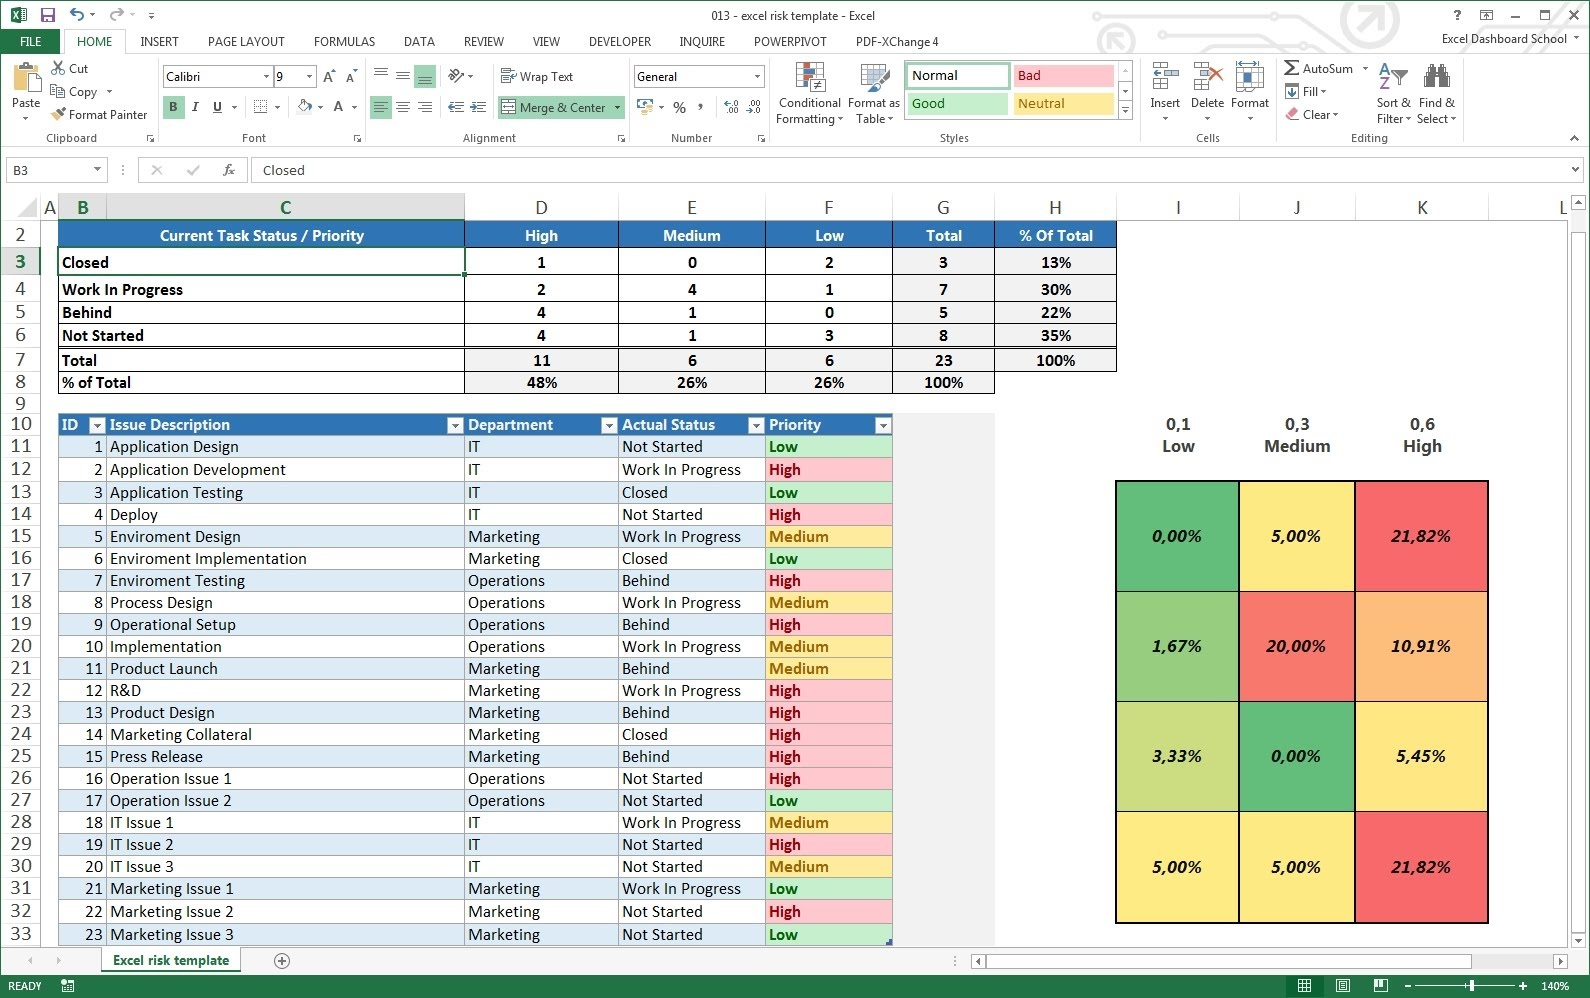 task management with excel